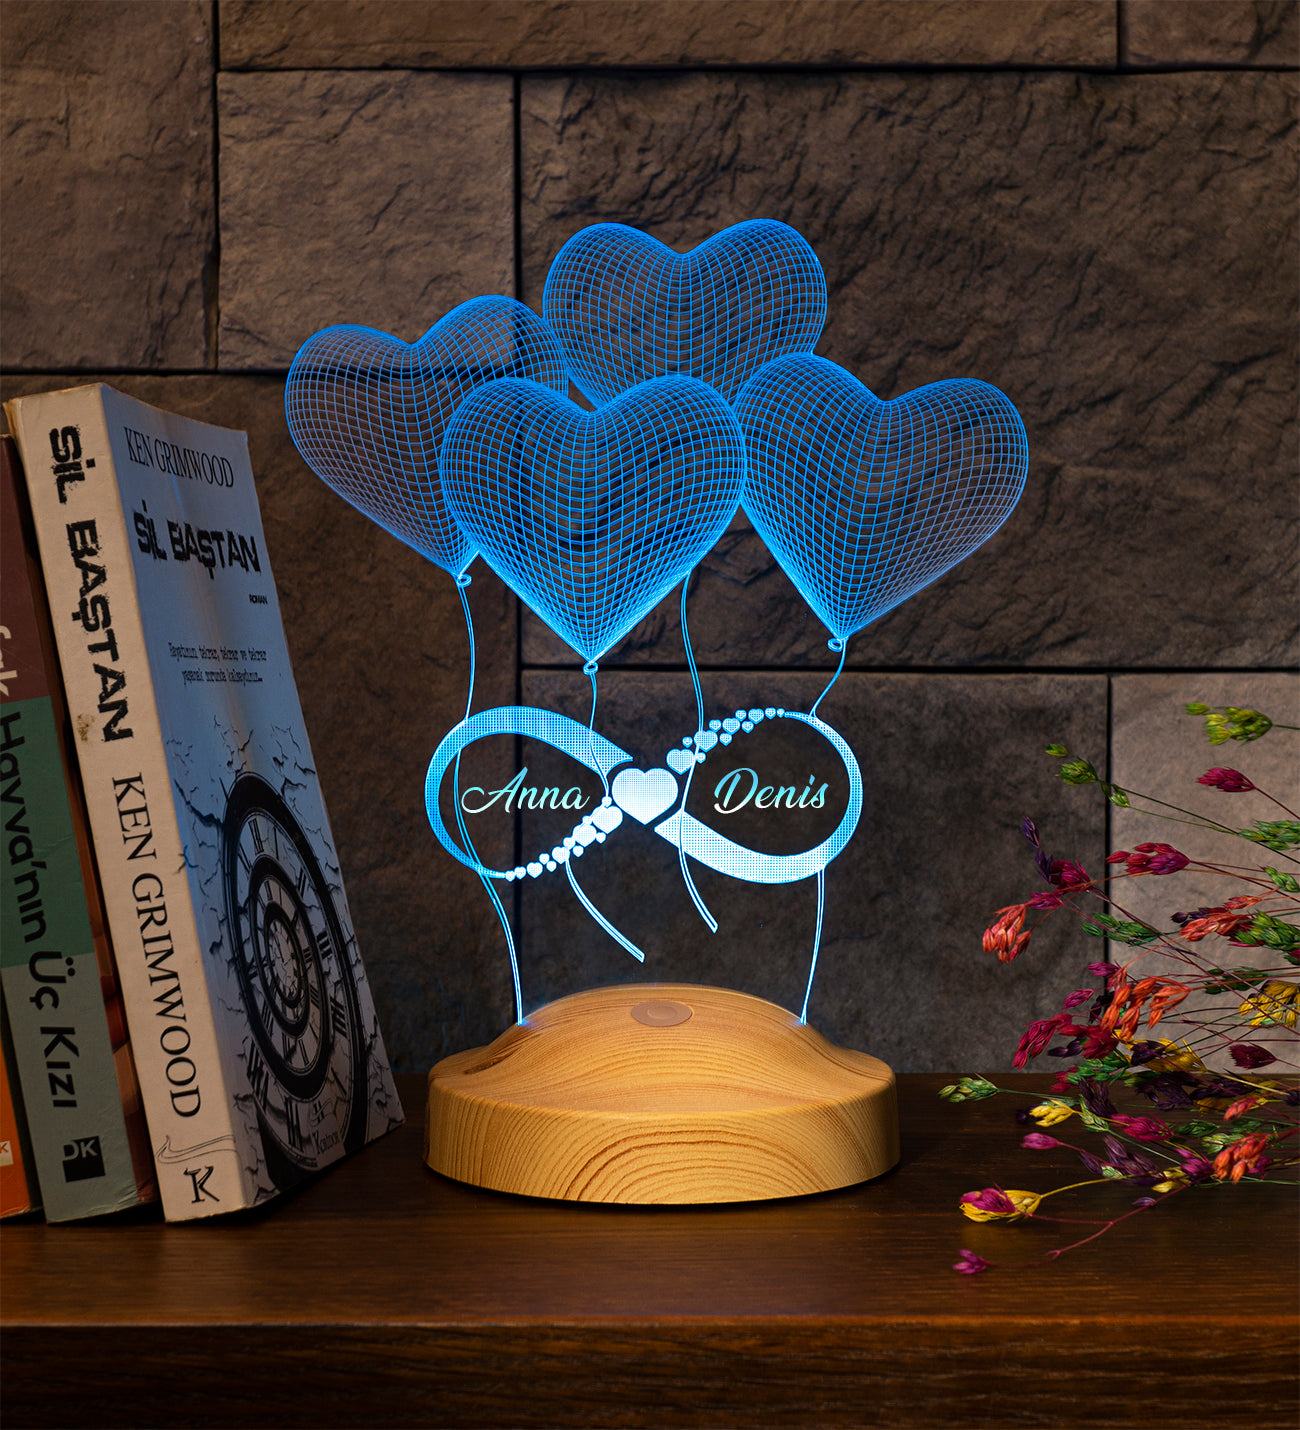 Balloon Hearts Infinity Valentine's Day Gift Personalized Engraved Lamp